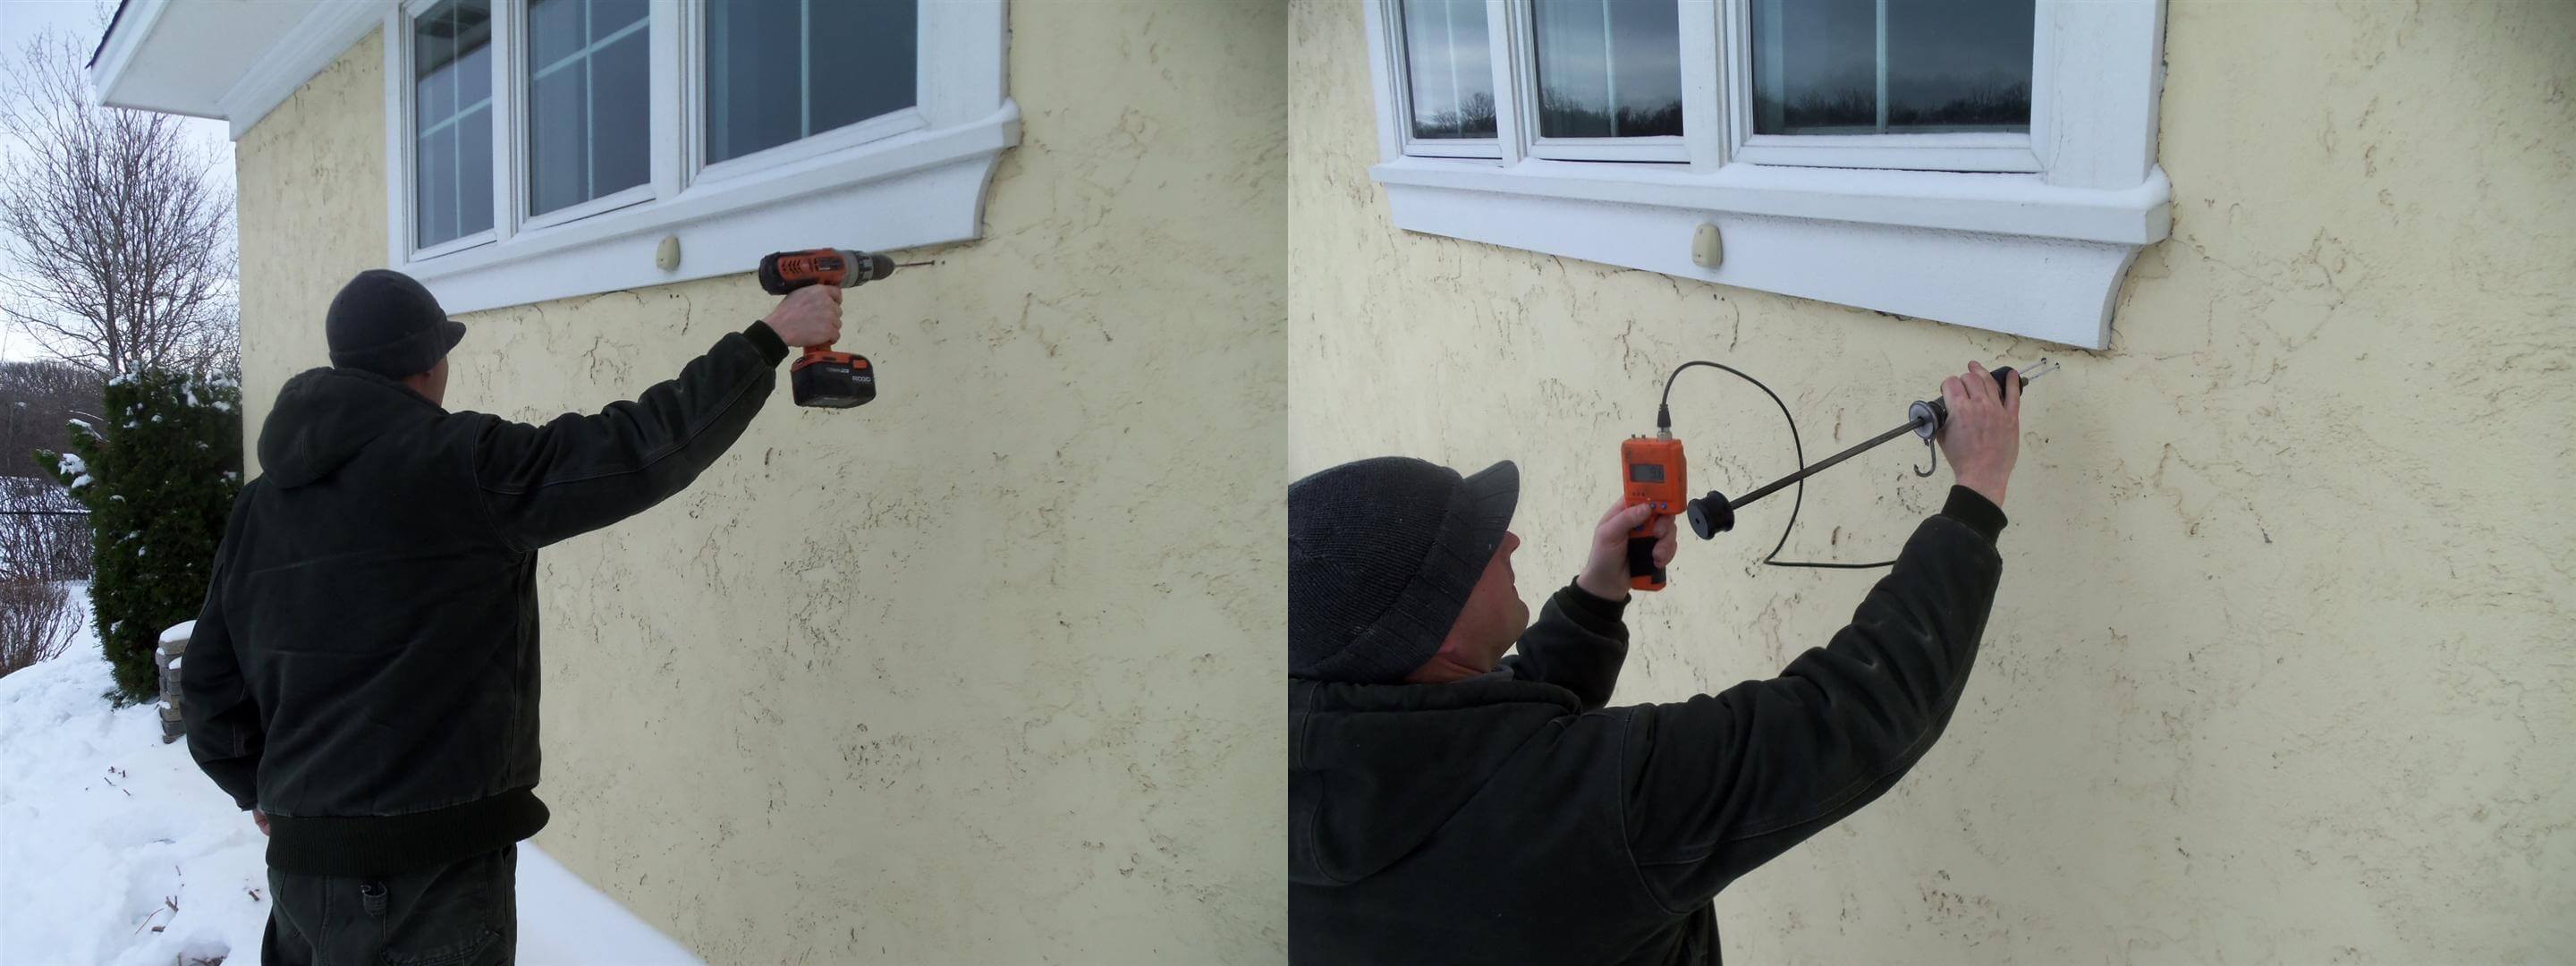 installing ring camera on stucco